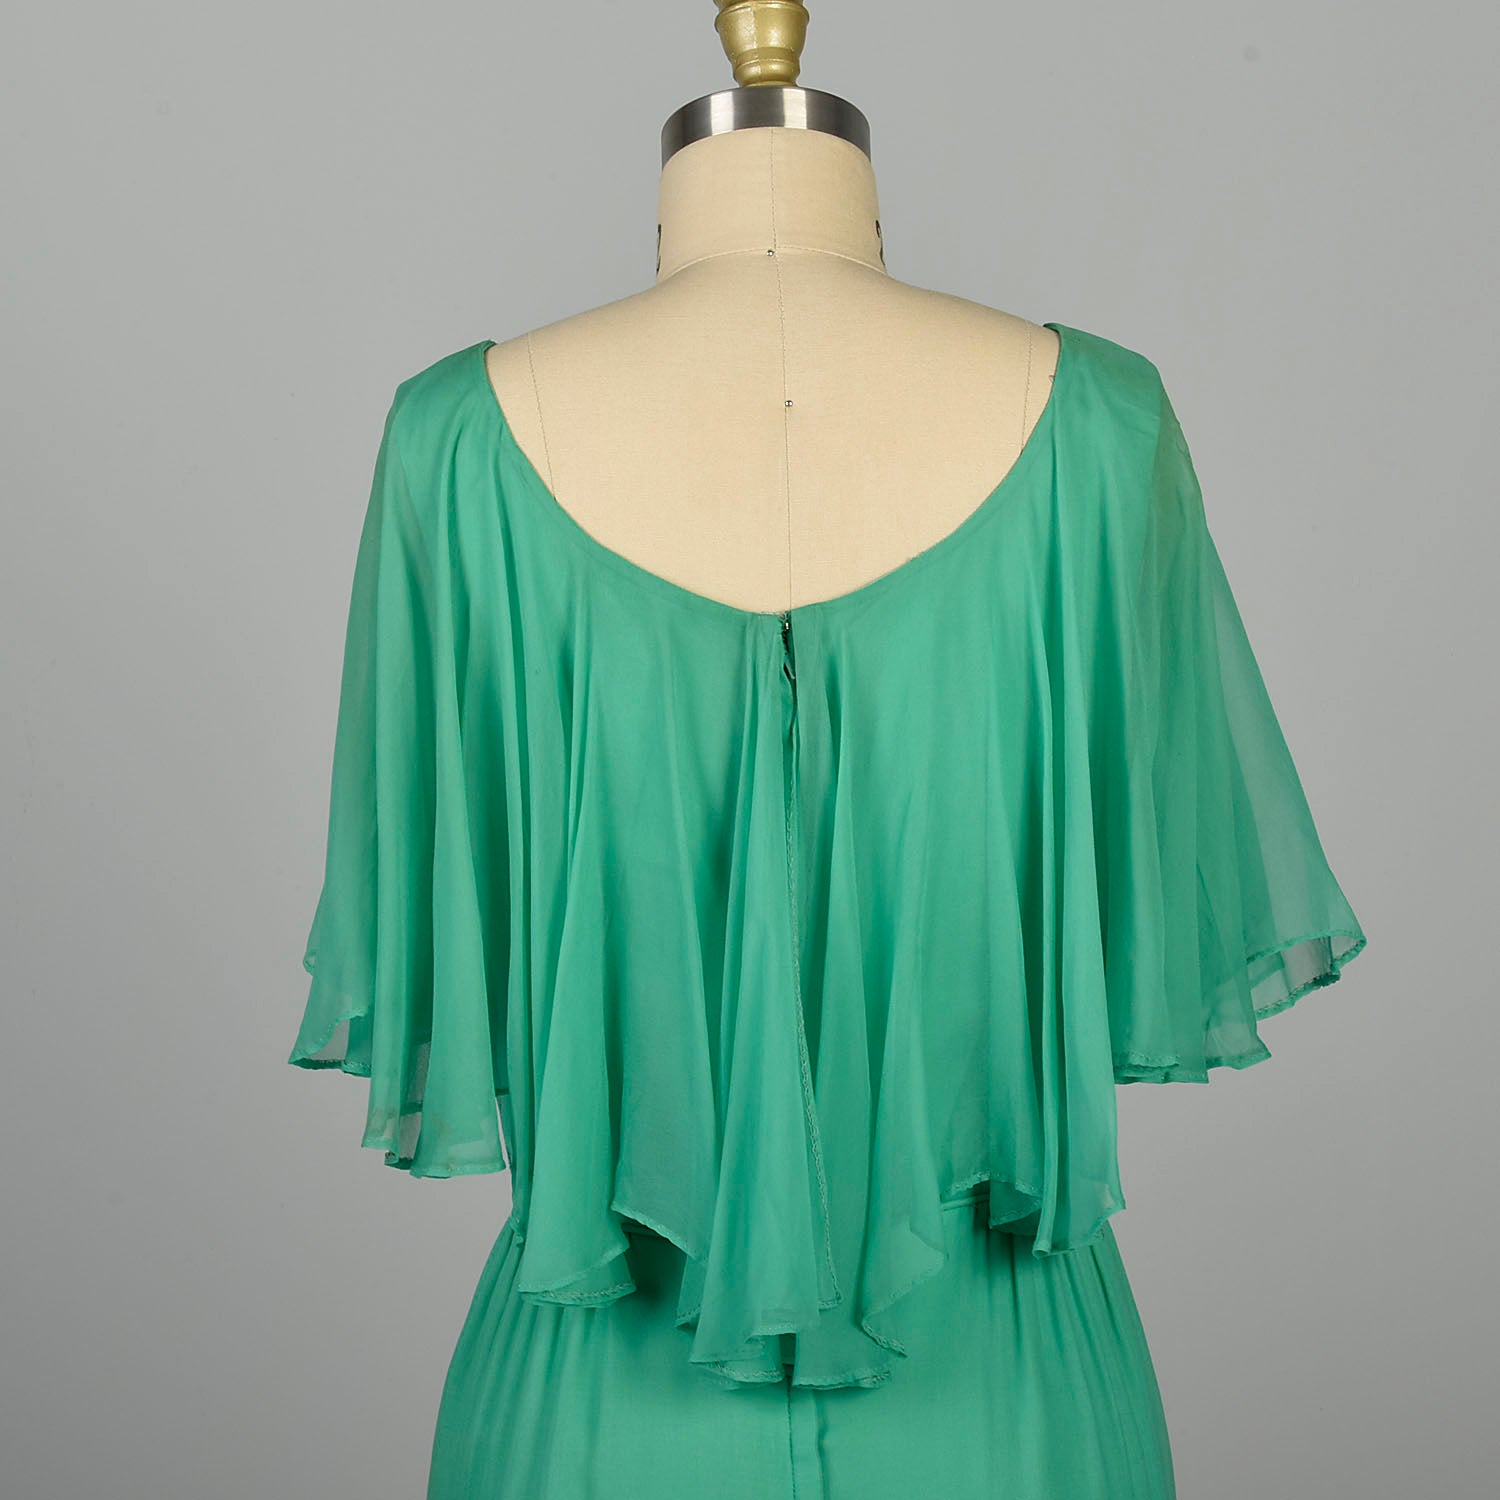 Small 1960s Wiggle Dress Emerald Green Cocktail Party Sleeveless Cape Collar